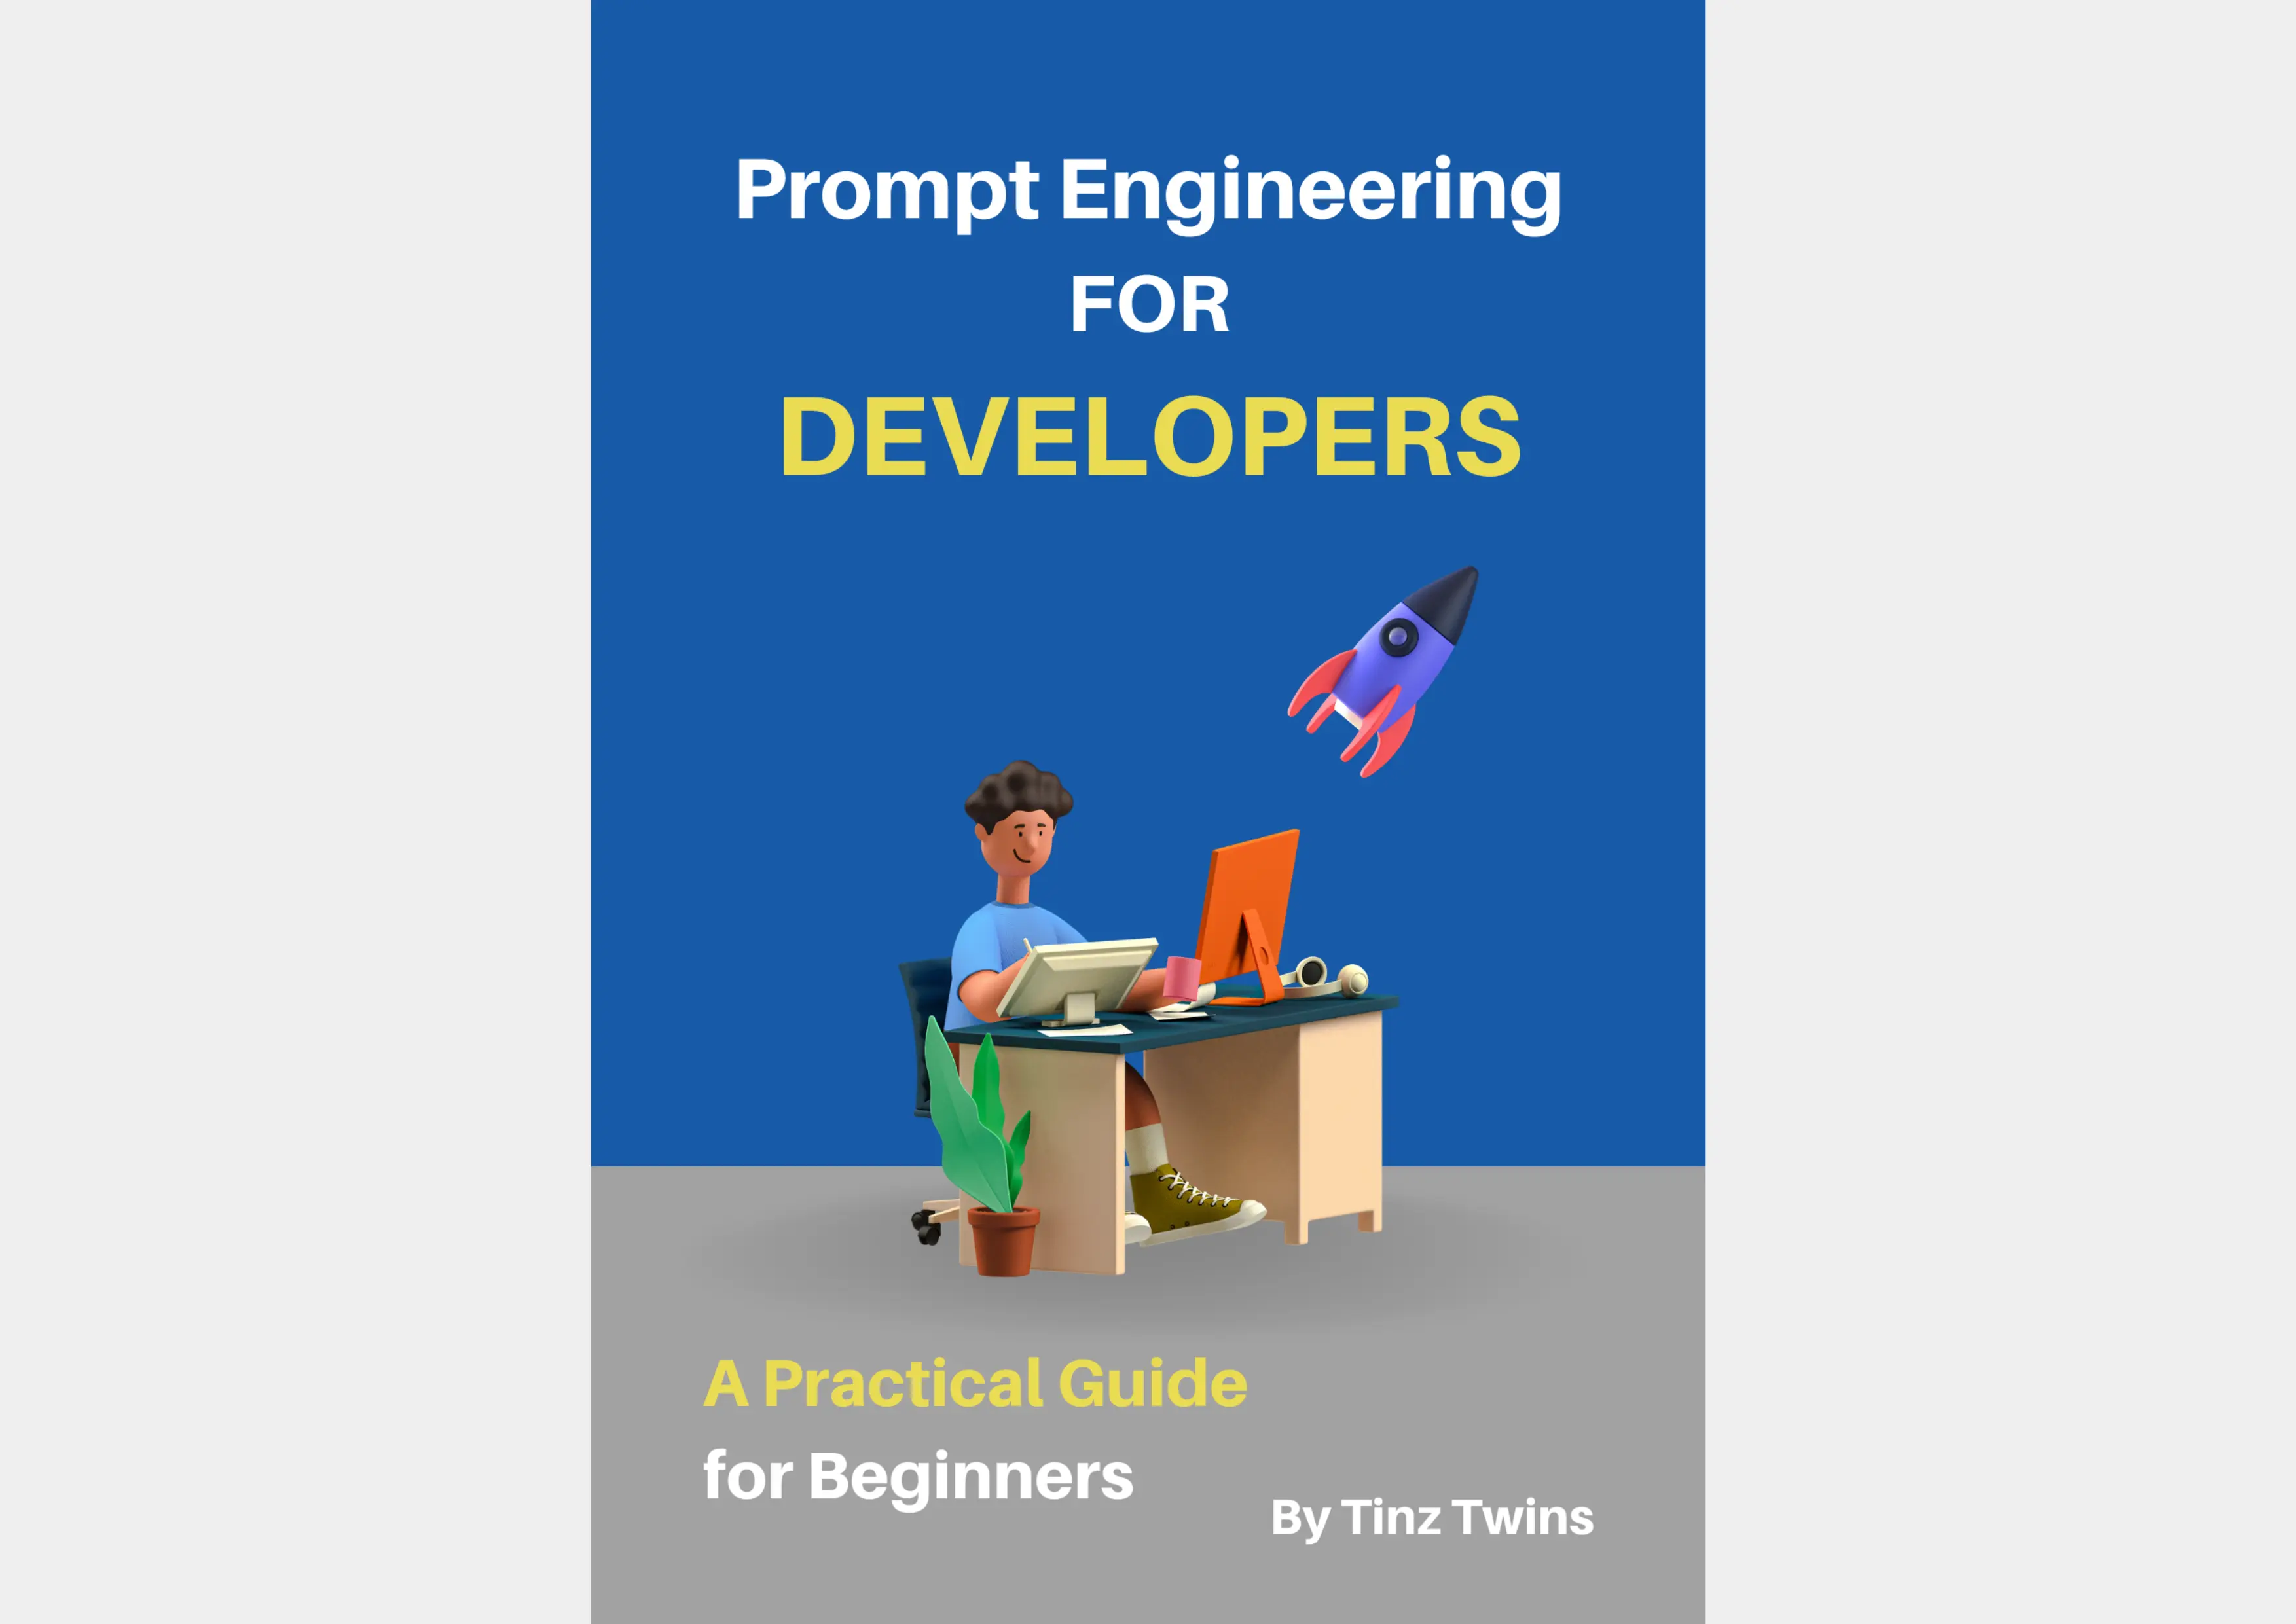 Prompt Engineering for Developers - Beginners Guide